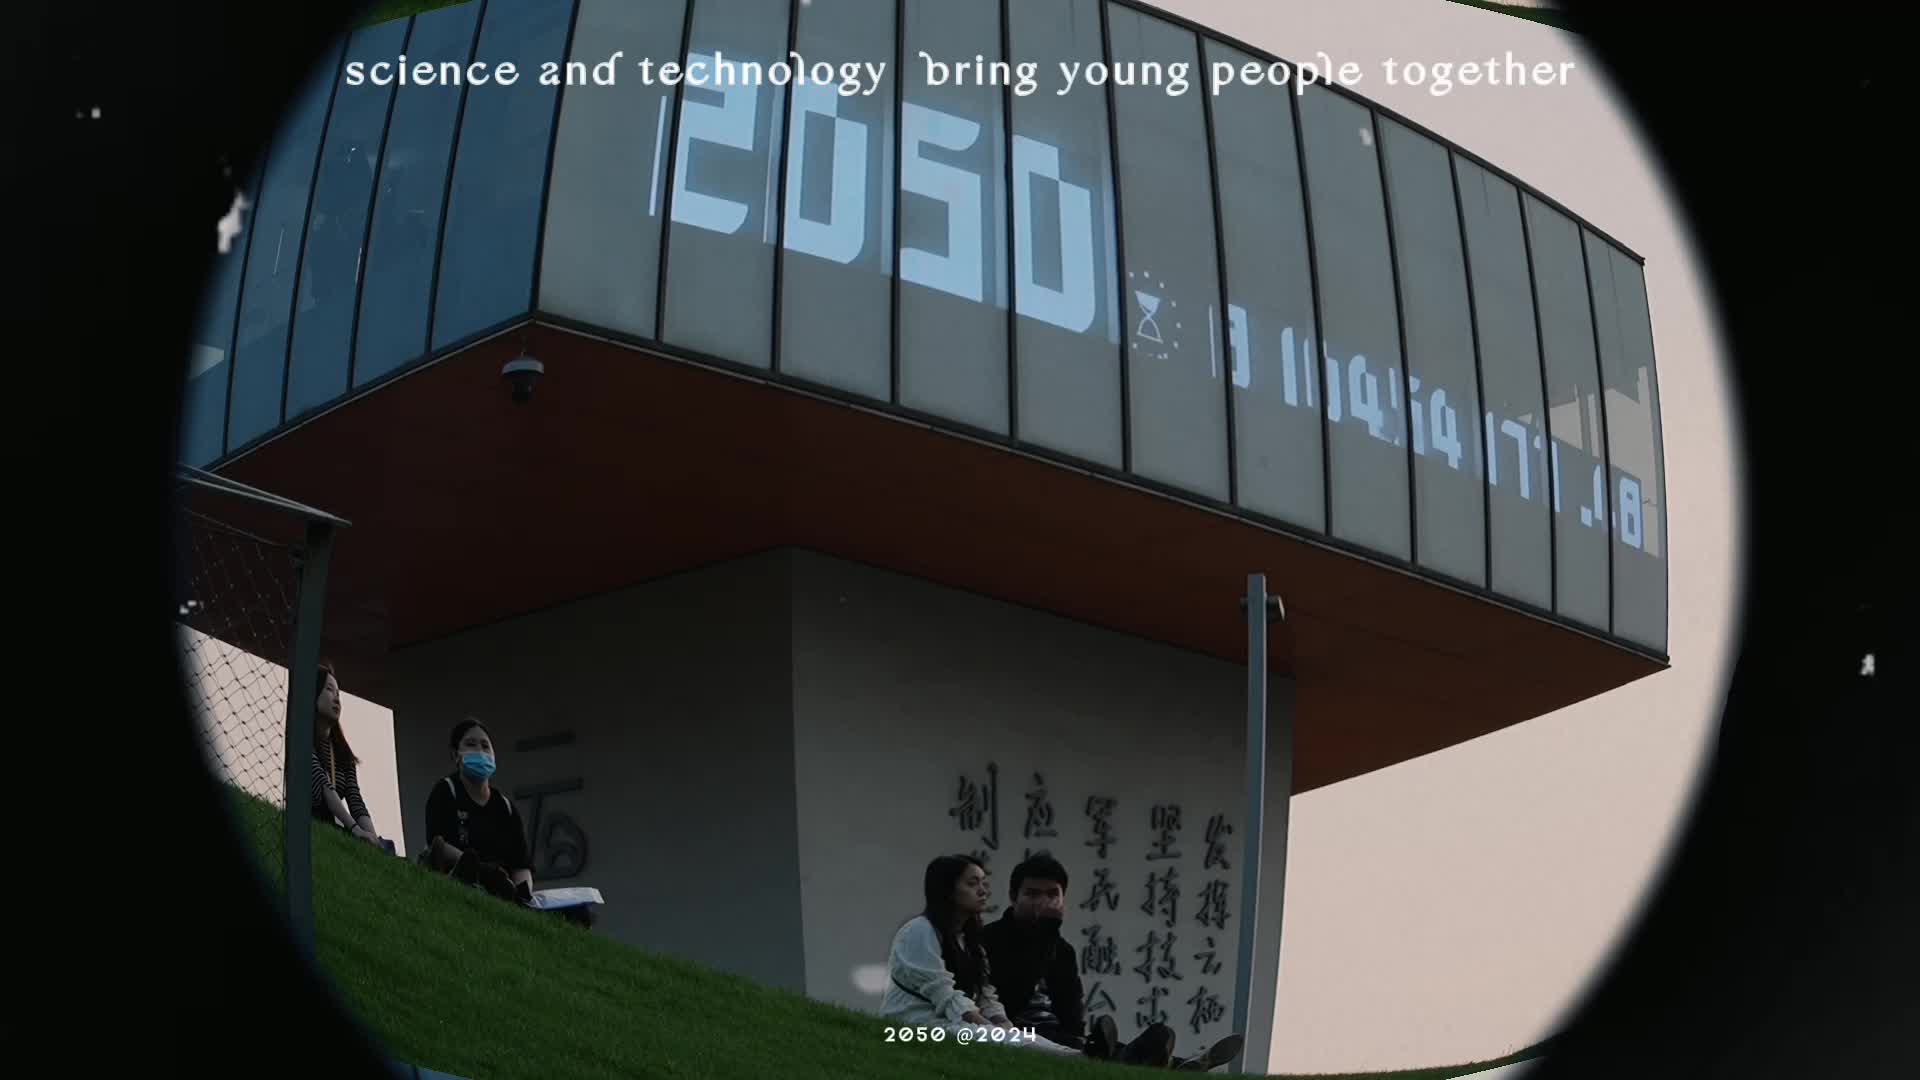 2050 vision: A glimpse into youth perspectives, aspirations